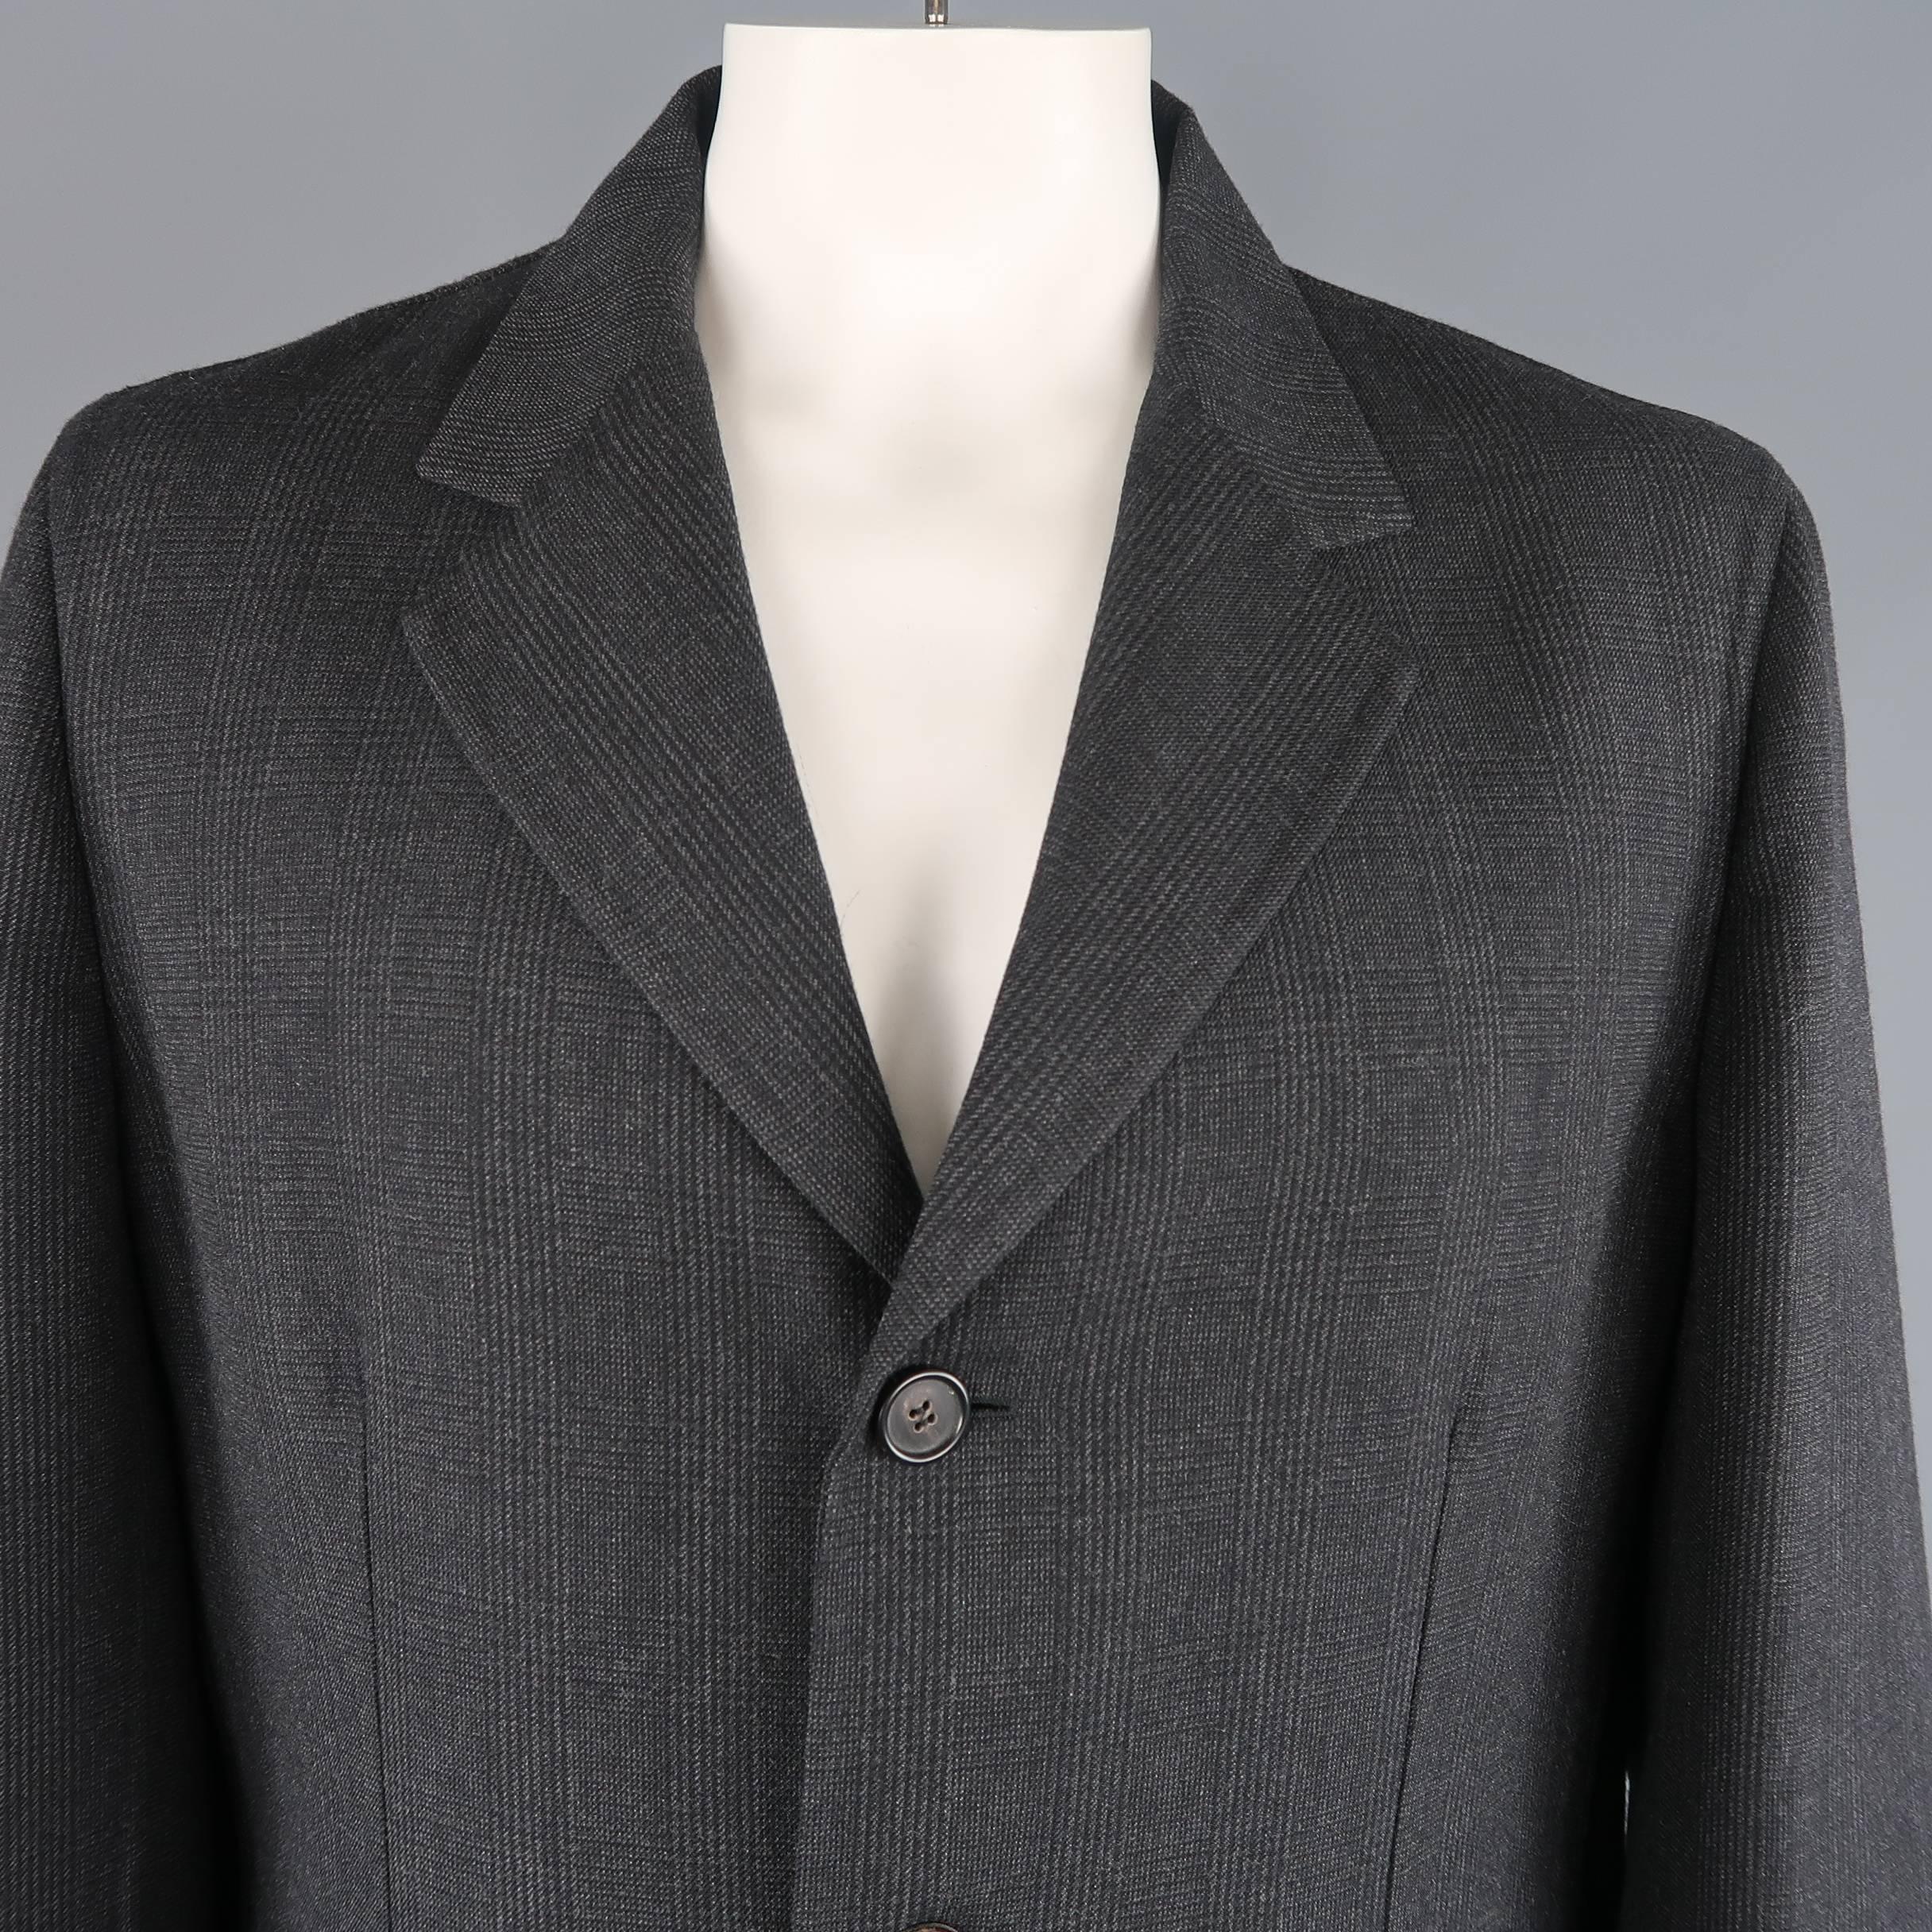 PRADA overcoat comes in charcoal gray glenplaid print structured wool with a notch lapel, three button front, and flap pockets. Made in Italy.
 
Excellent Pre-Owned Condition.
Marked: IT 56
 
Measurements:
 
Shoulder: 19 in.
Chest: 48 in.
Sleeve: 26